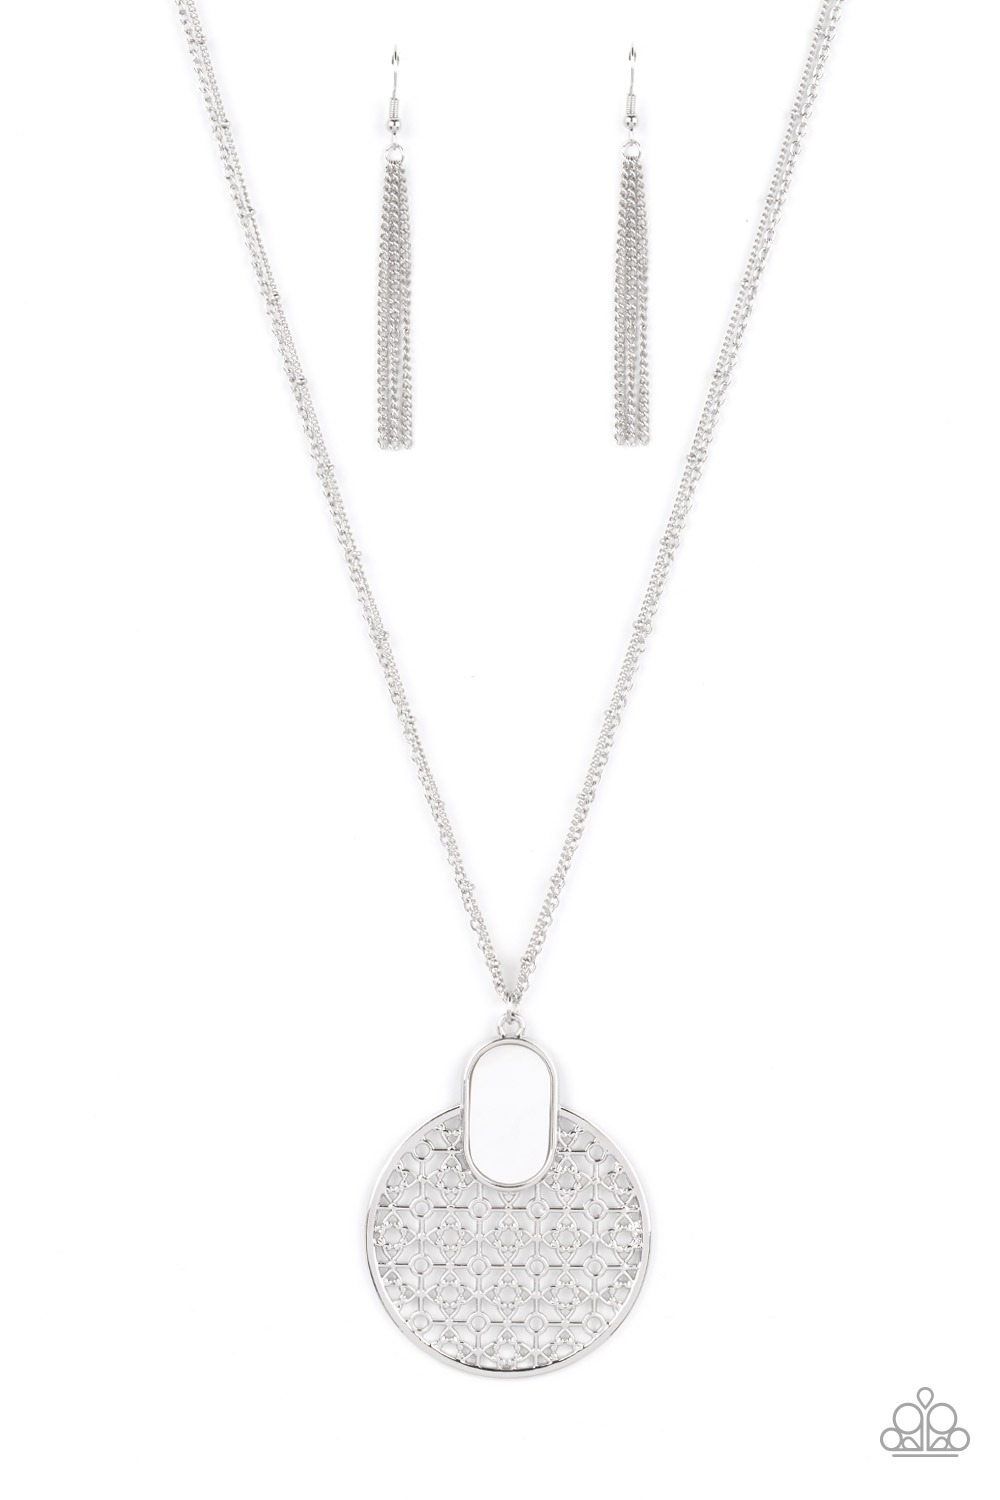 Necklace - South Beach Beauty - White